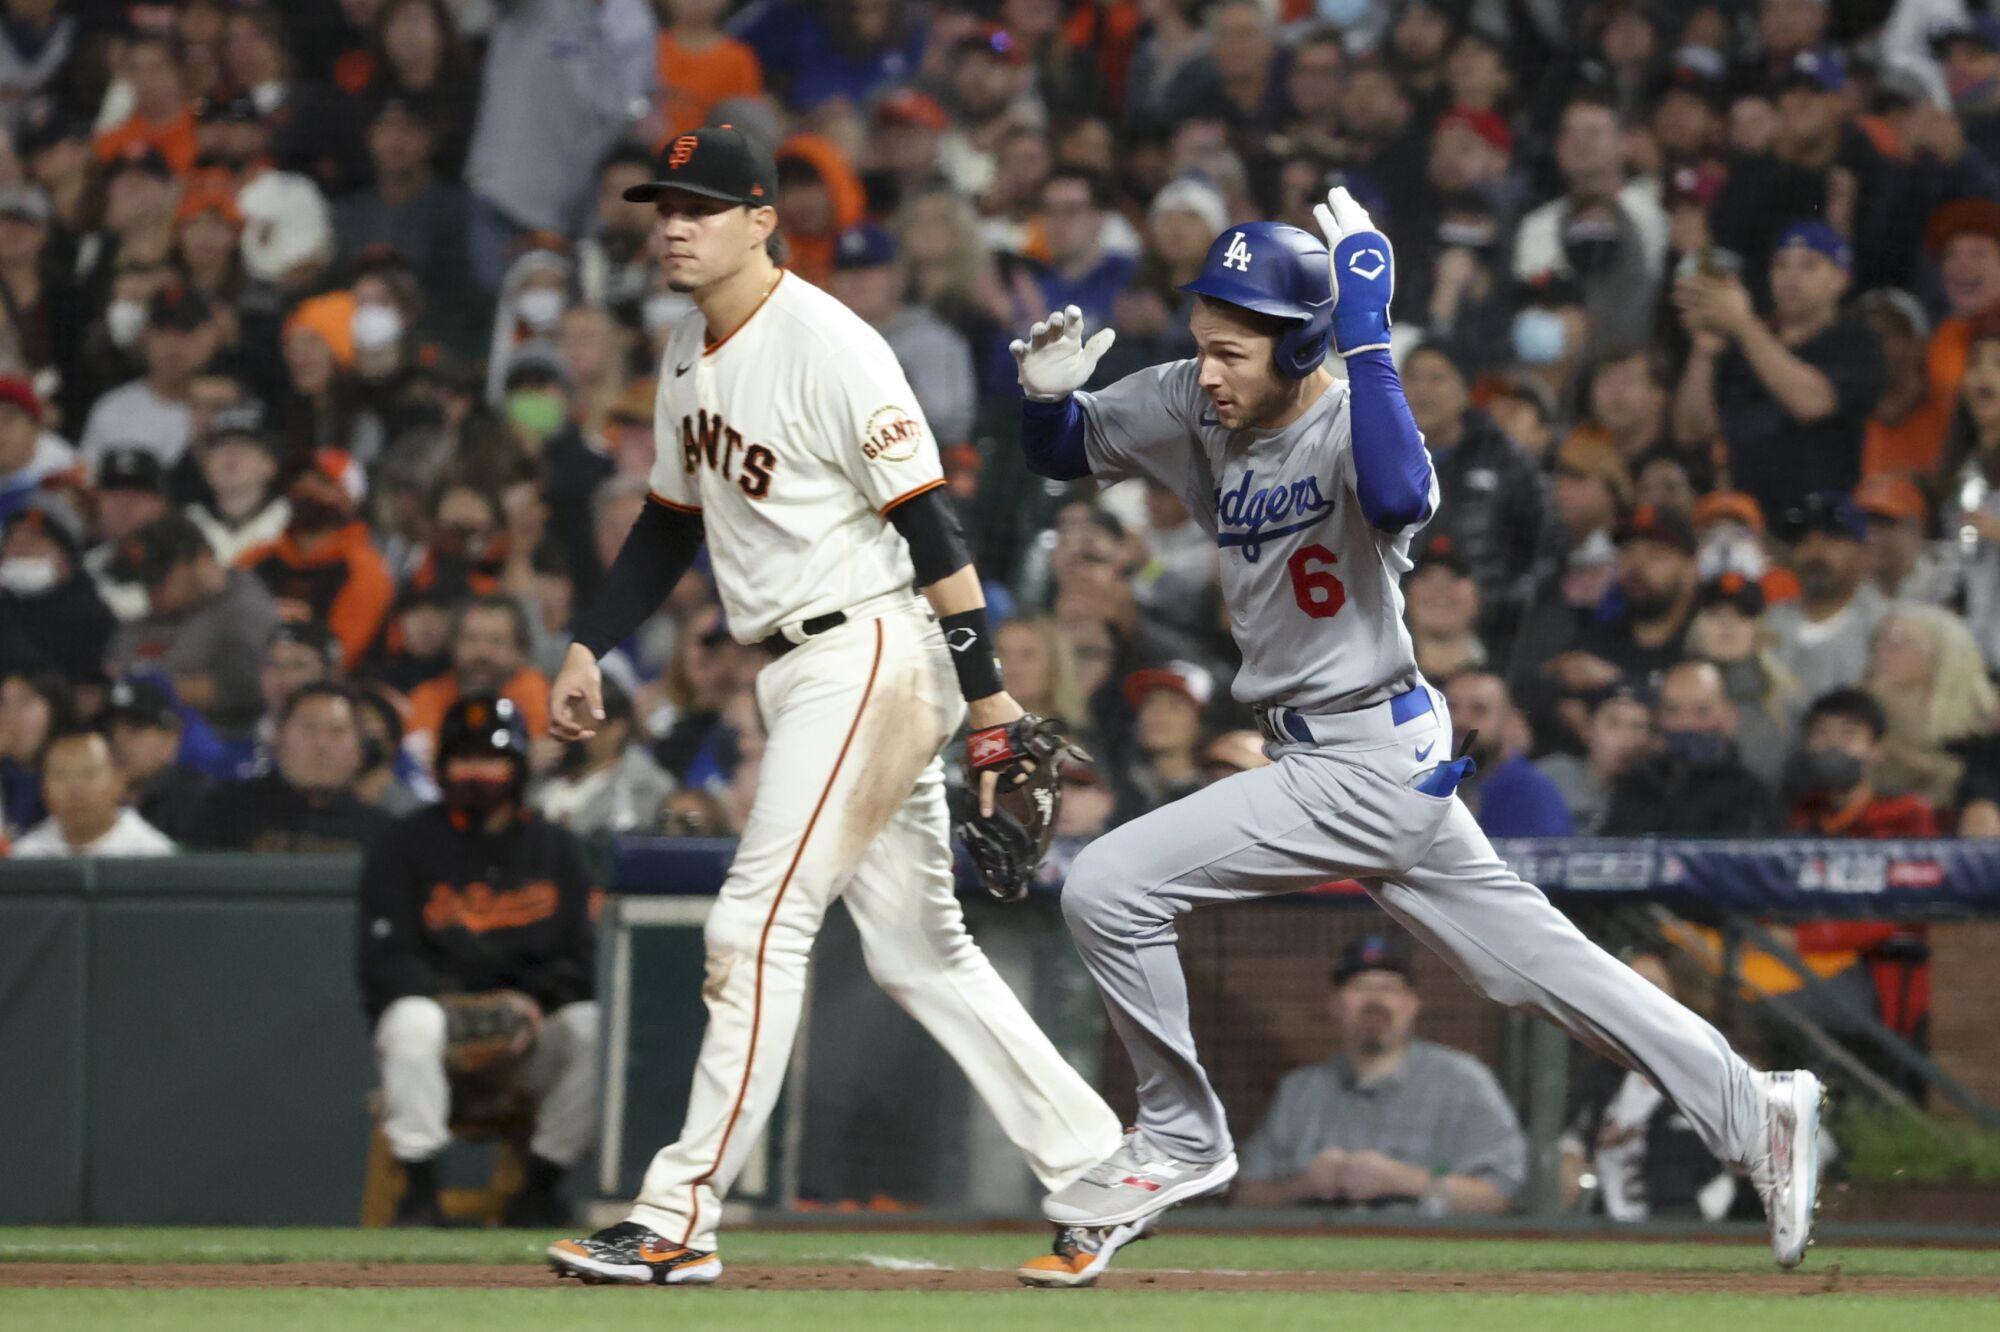 Dodgers defeat Giants 9 2 in Game 2 of the NLDS series tied 1 1